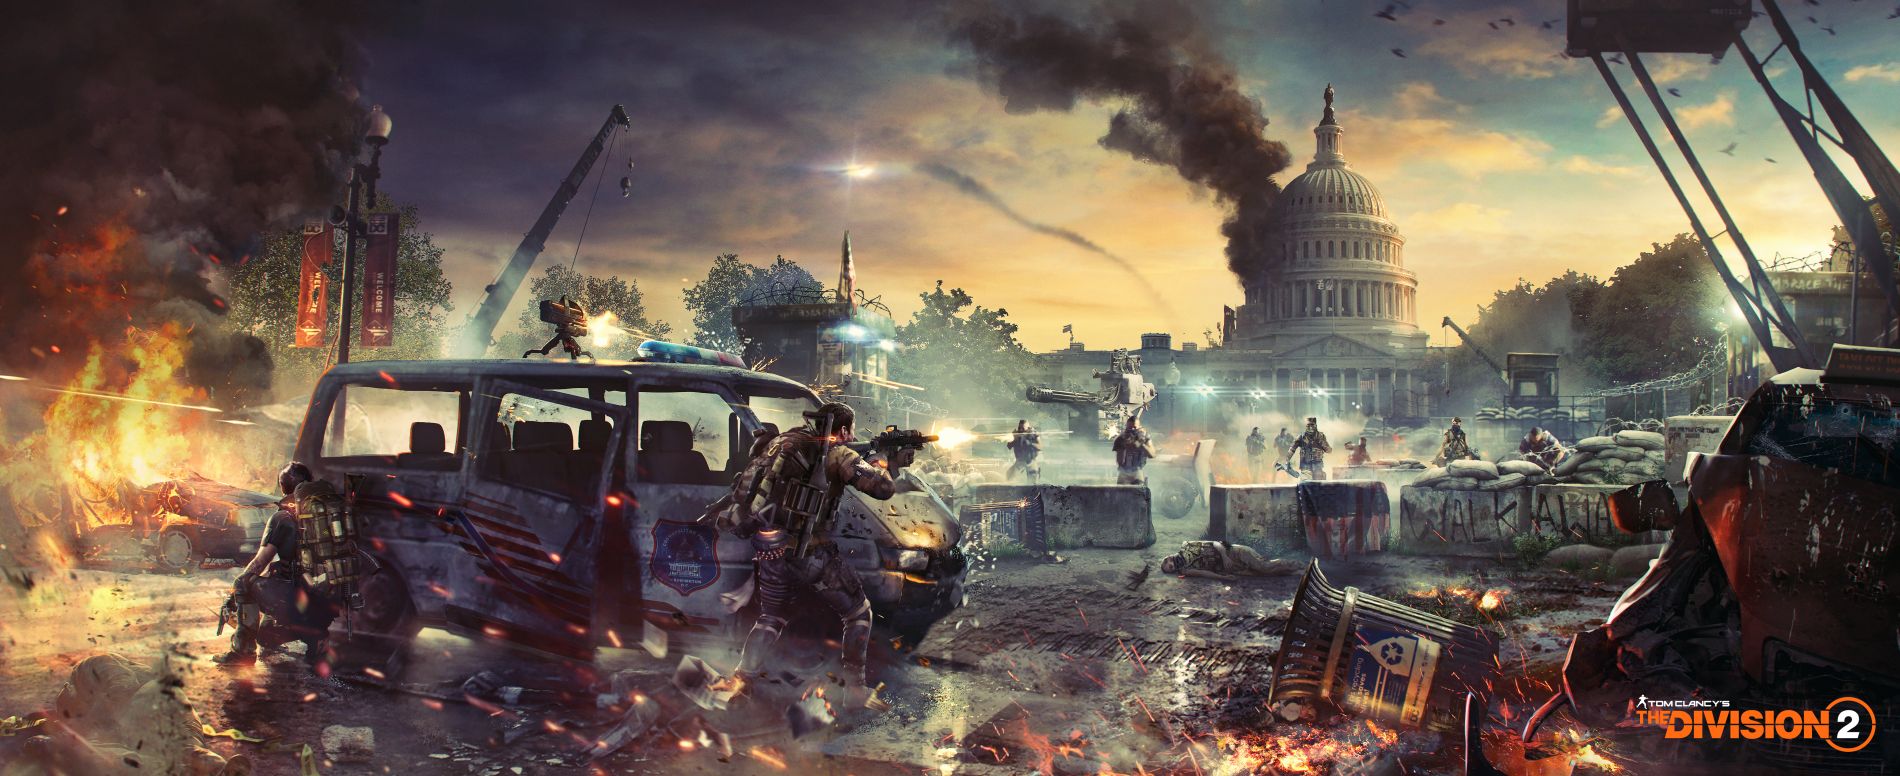 The Division 2 Minimum Recommended High End Pc Specs Announced Vg247